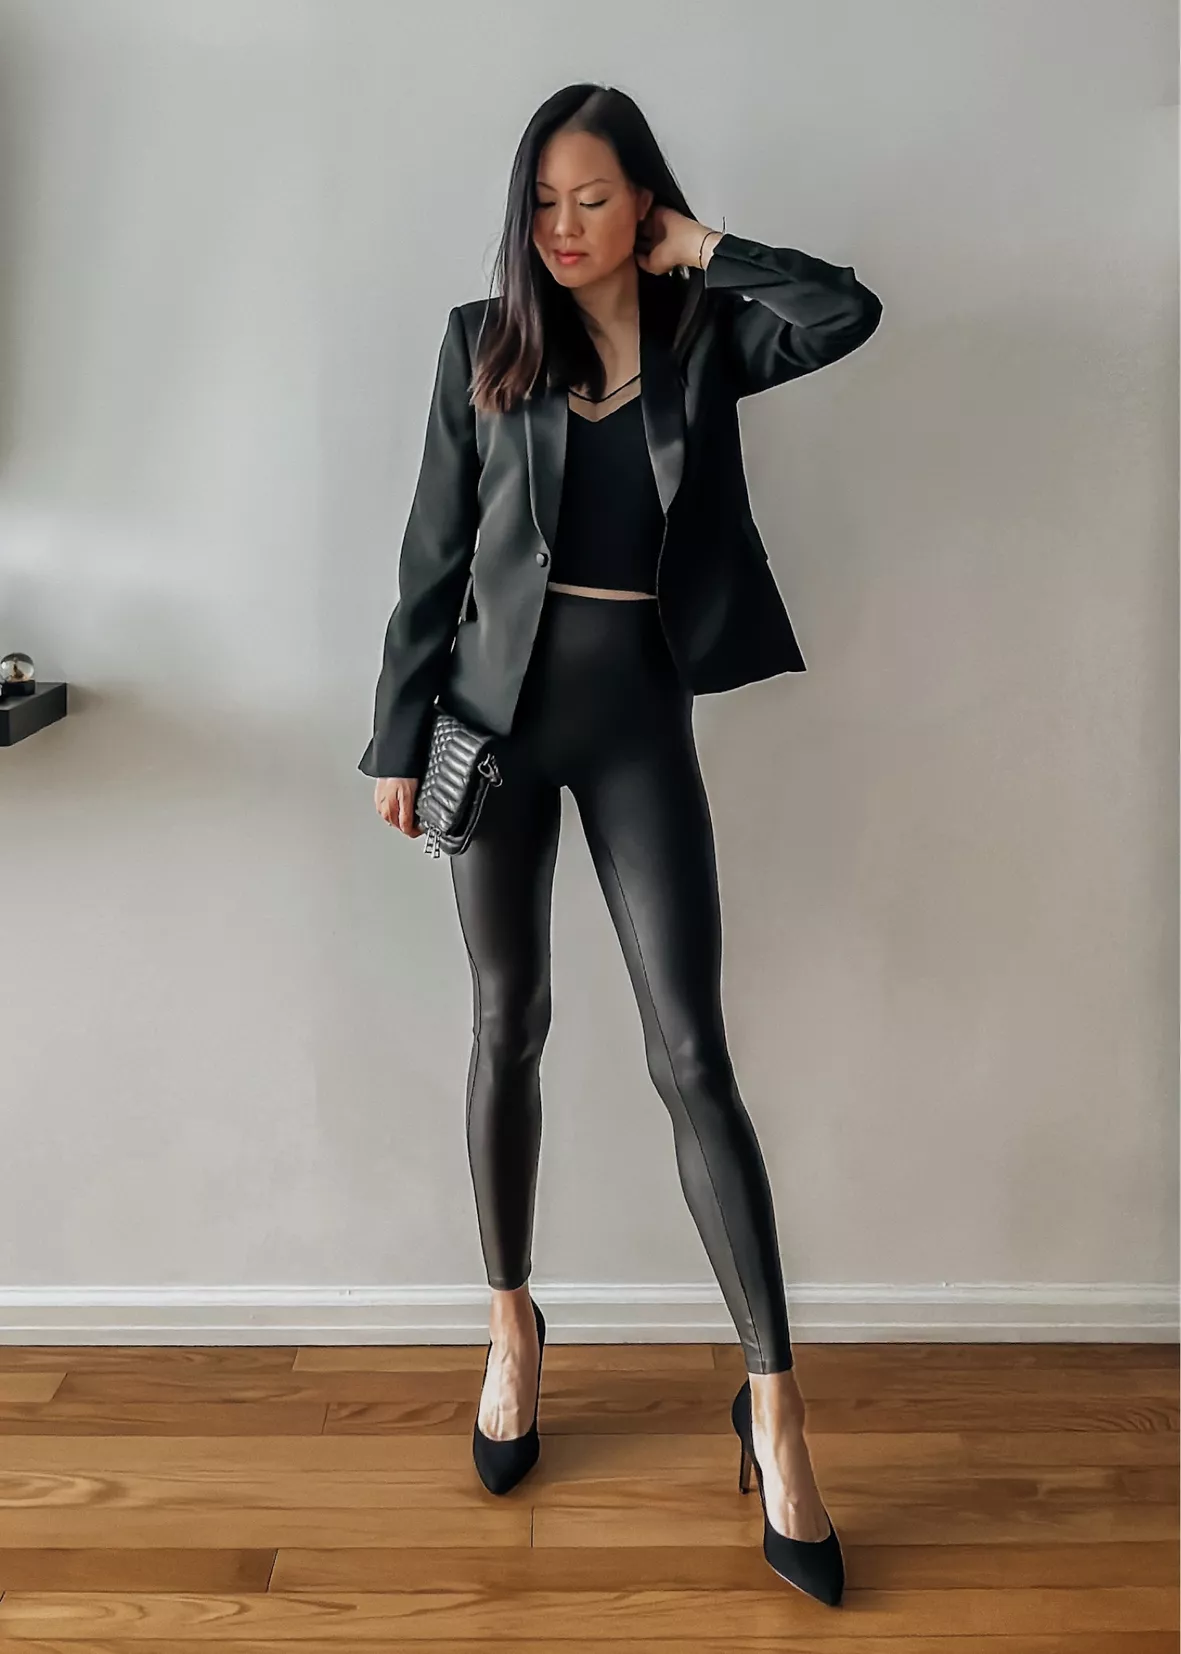 Leather Leggings Outfit Dressy